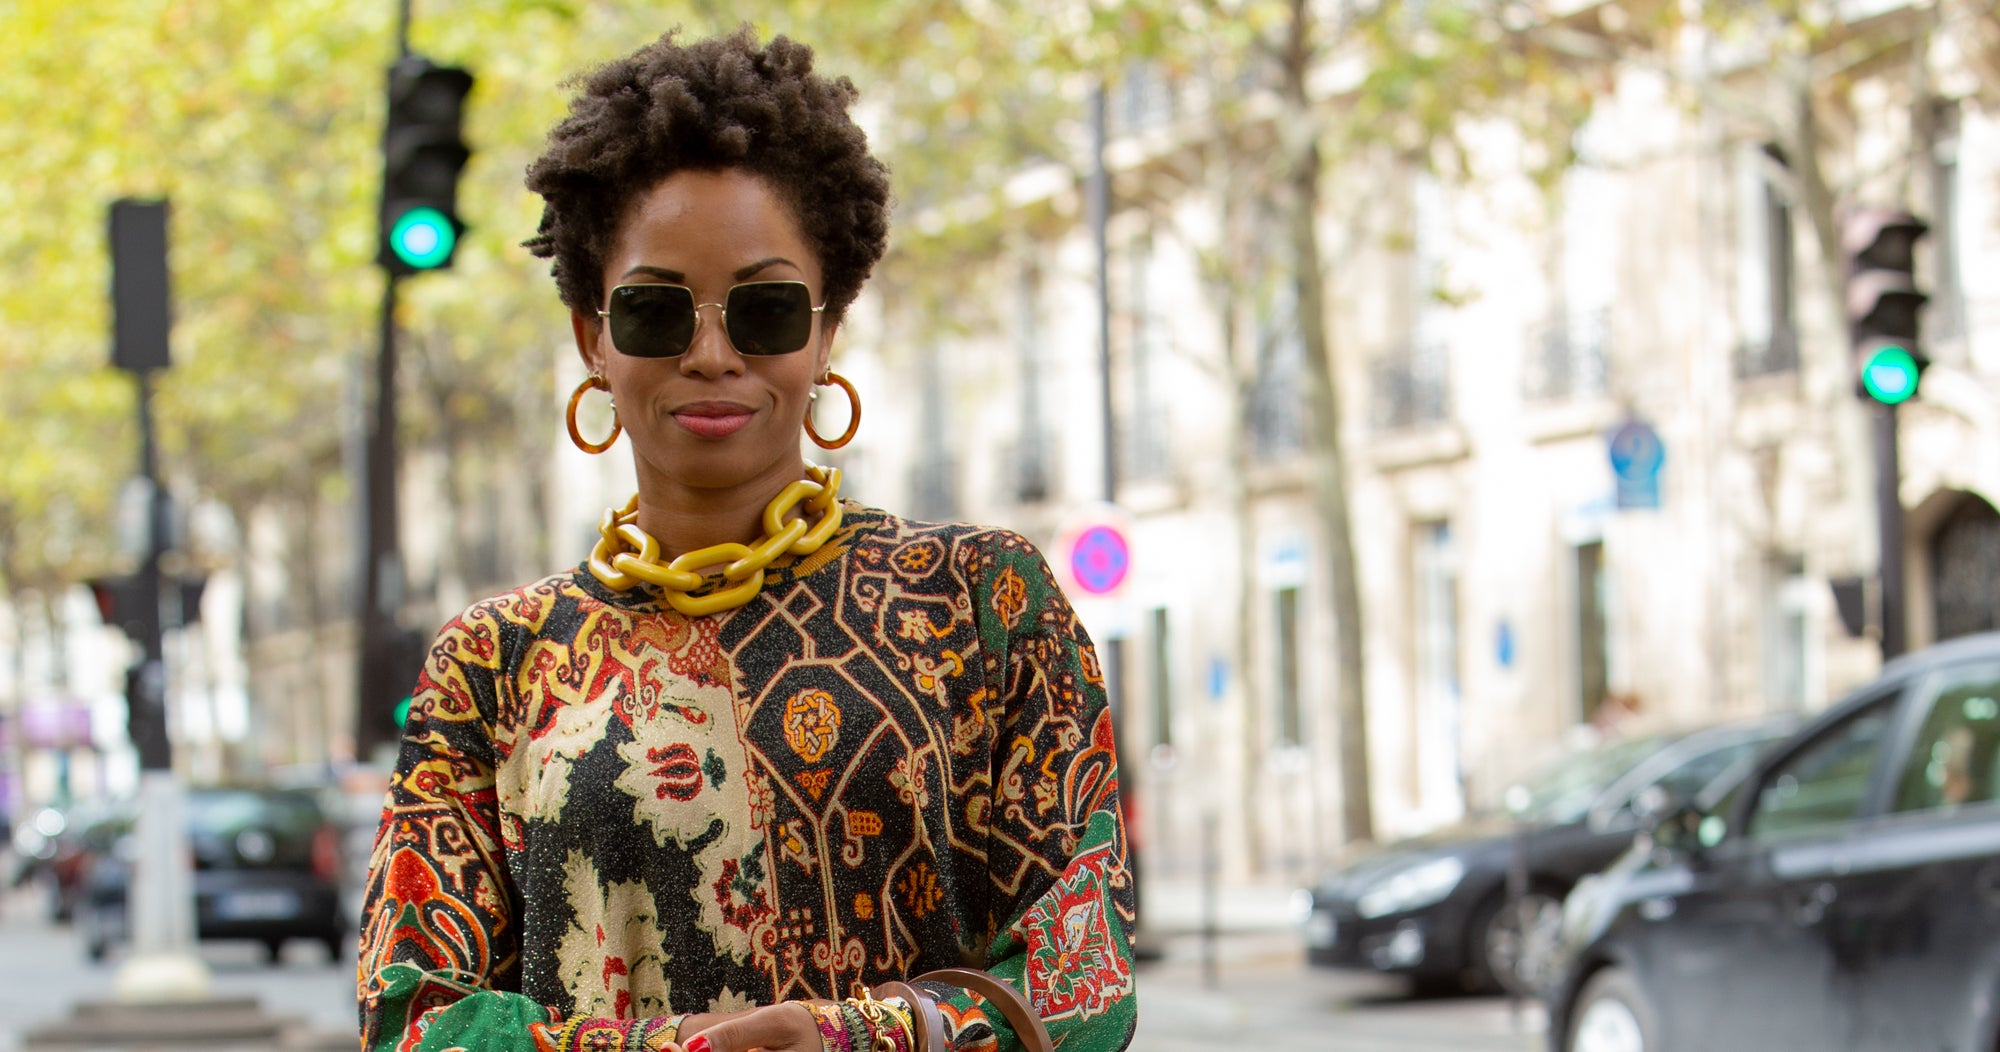 Paris Fashion Week 2020 Street Style: All the Coolest Looks